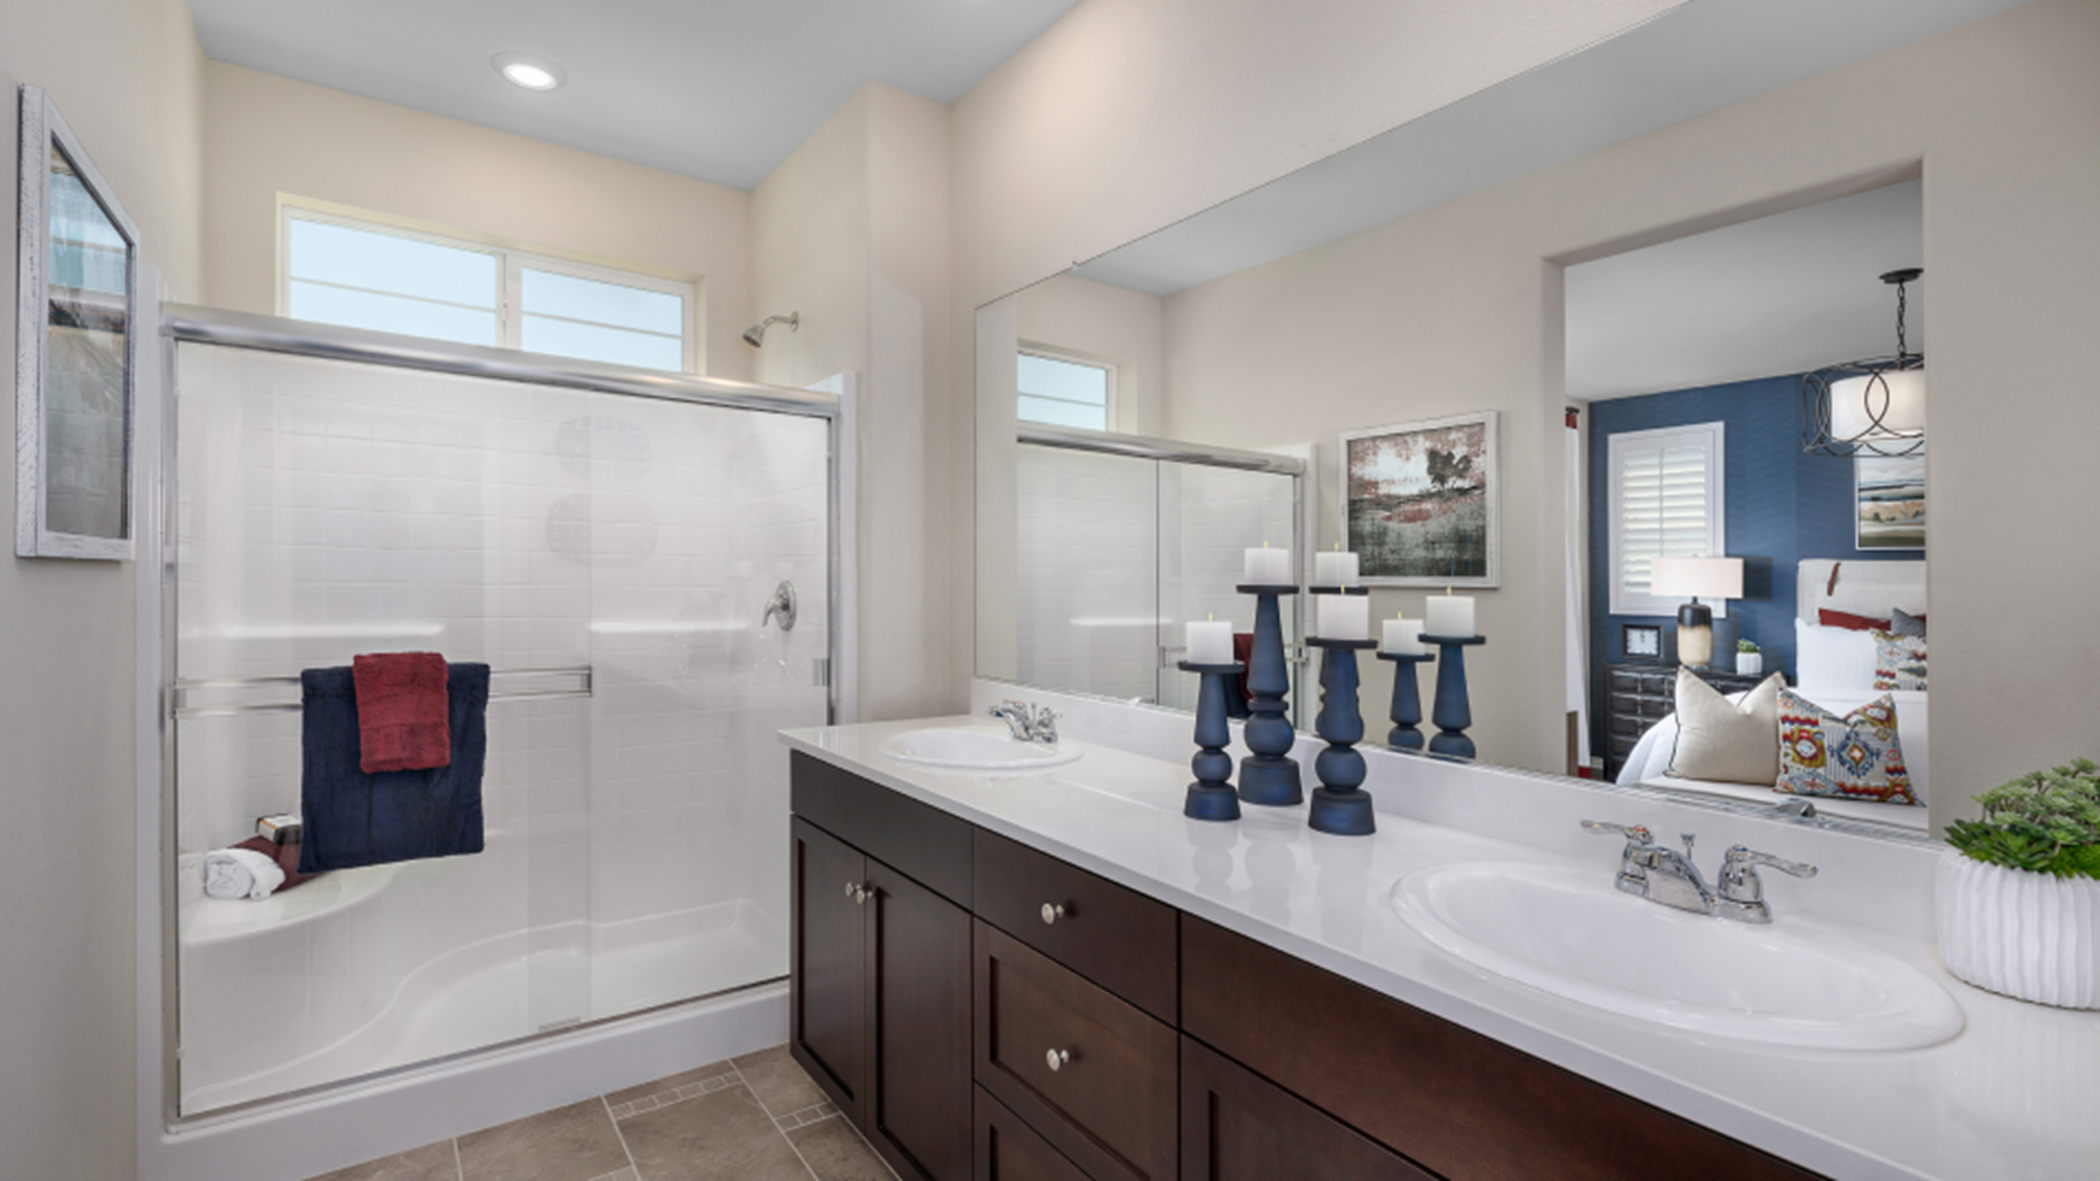 Bathroom with dual sinks and a glass-enclosed shower